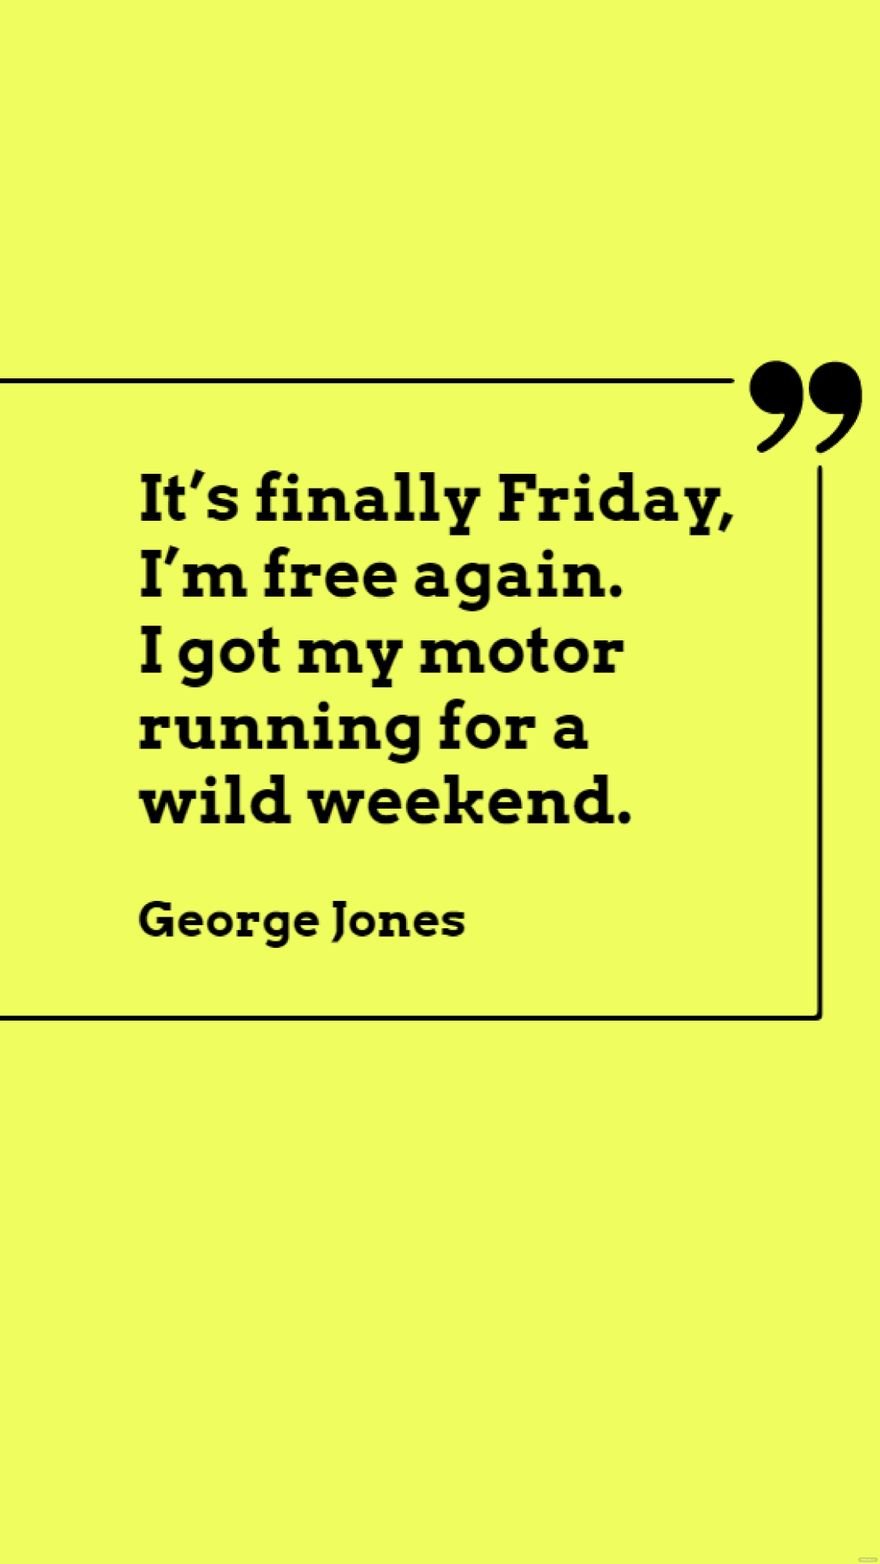 George Jones - It’s finally Friday, I’m free again. I got my motor running for a wild weekend. 